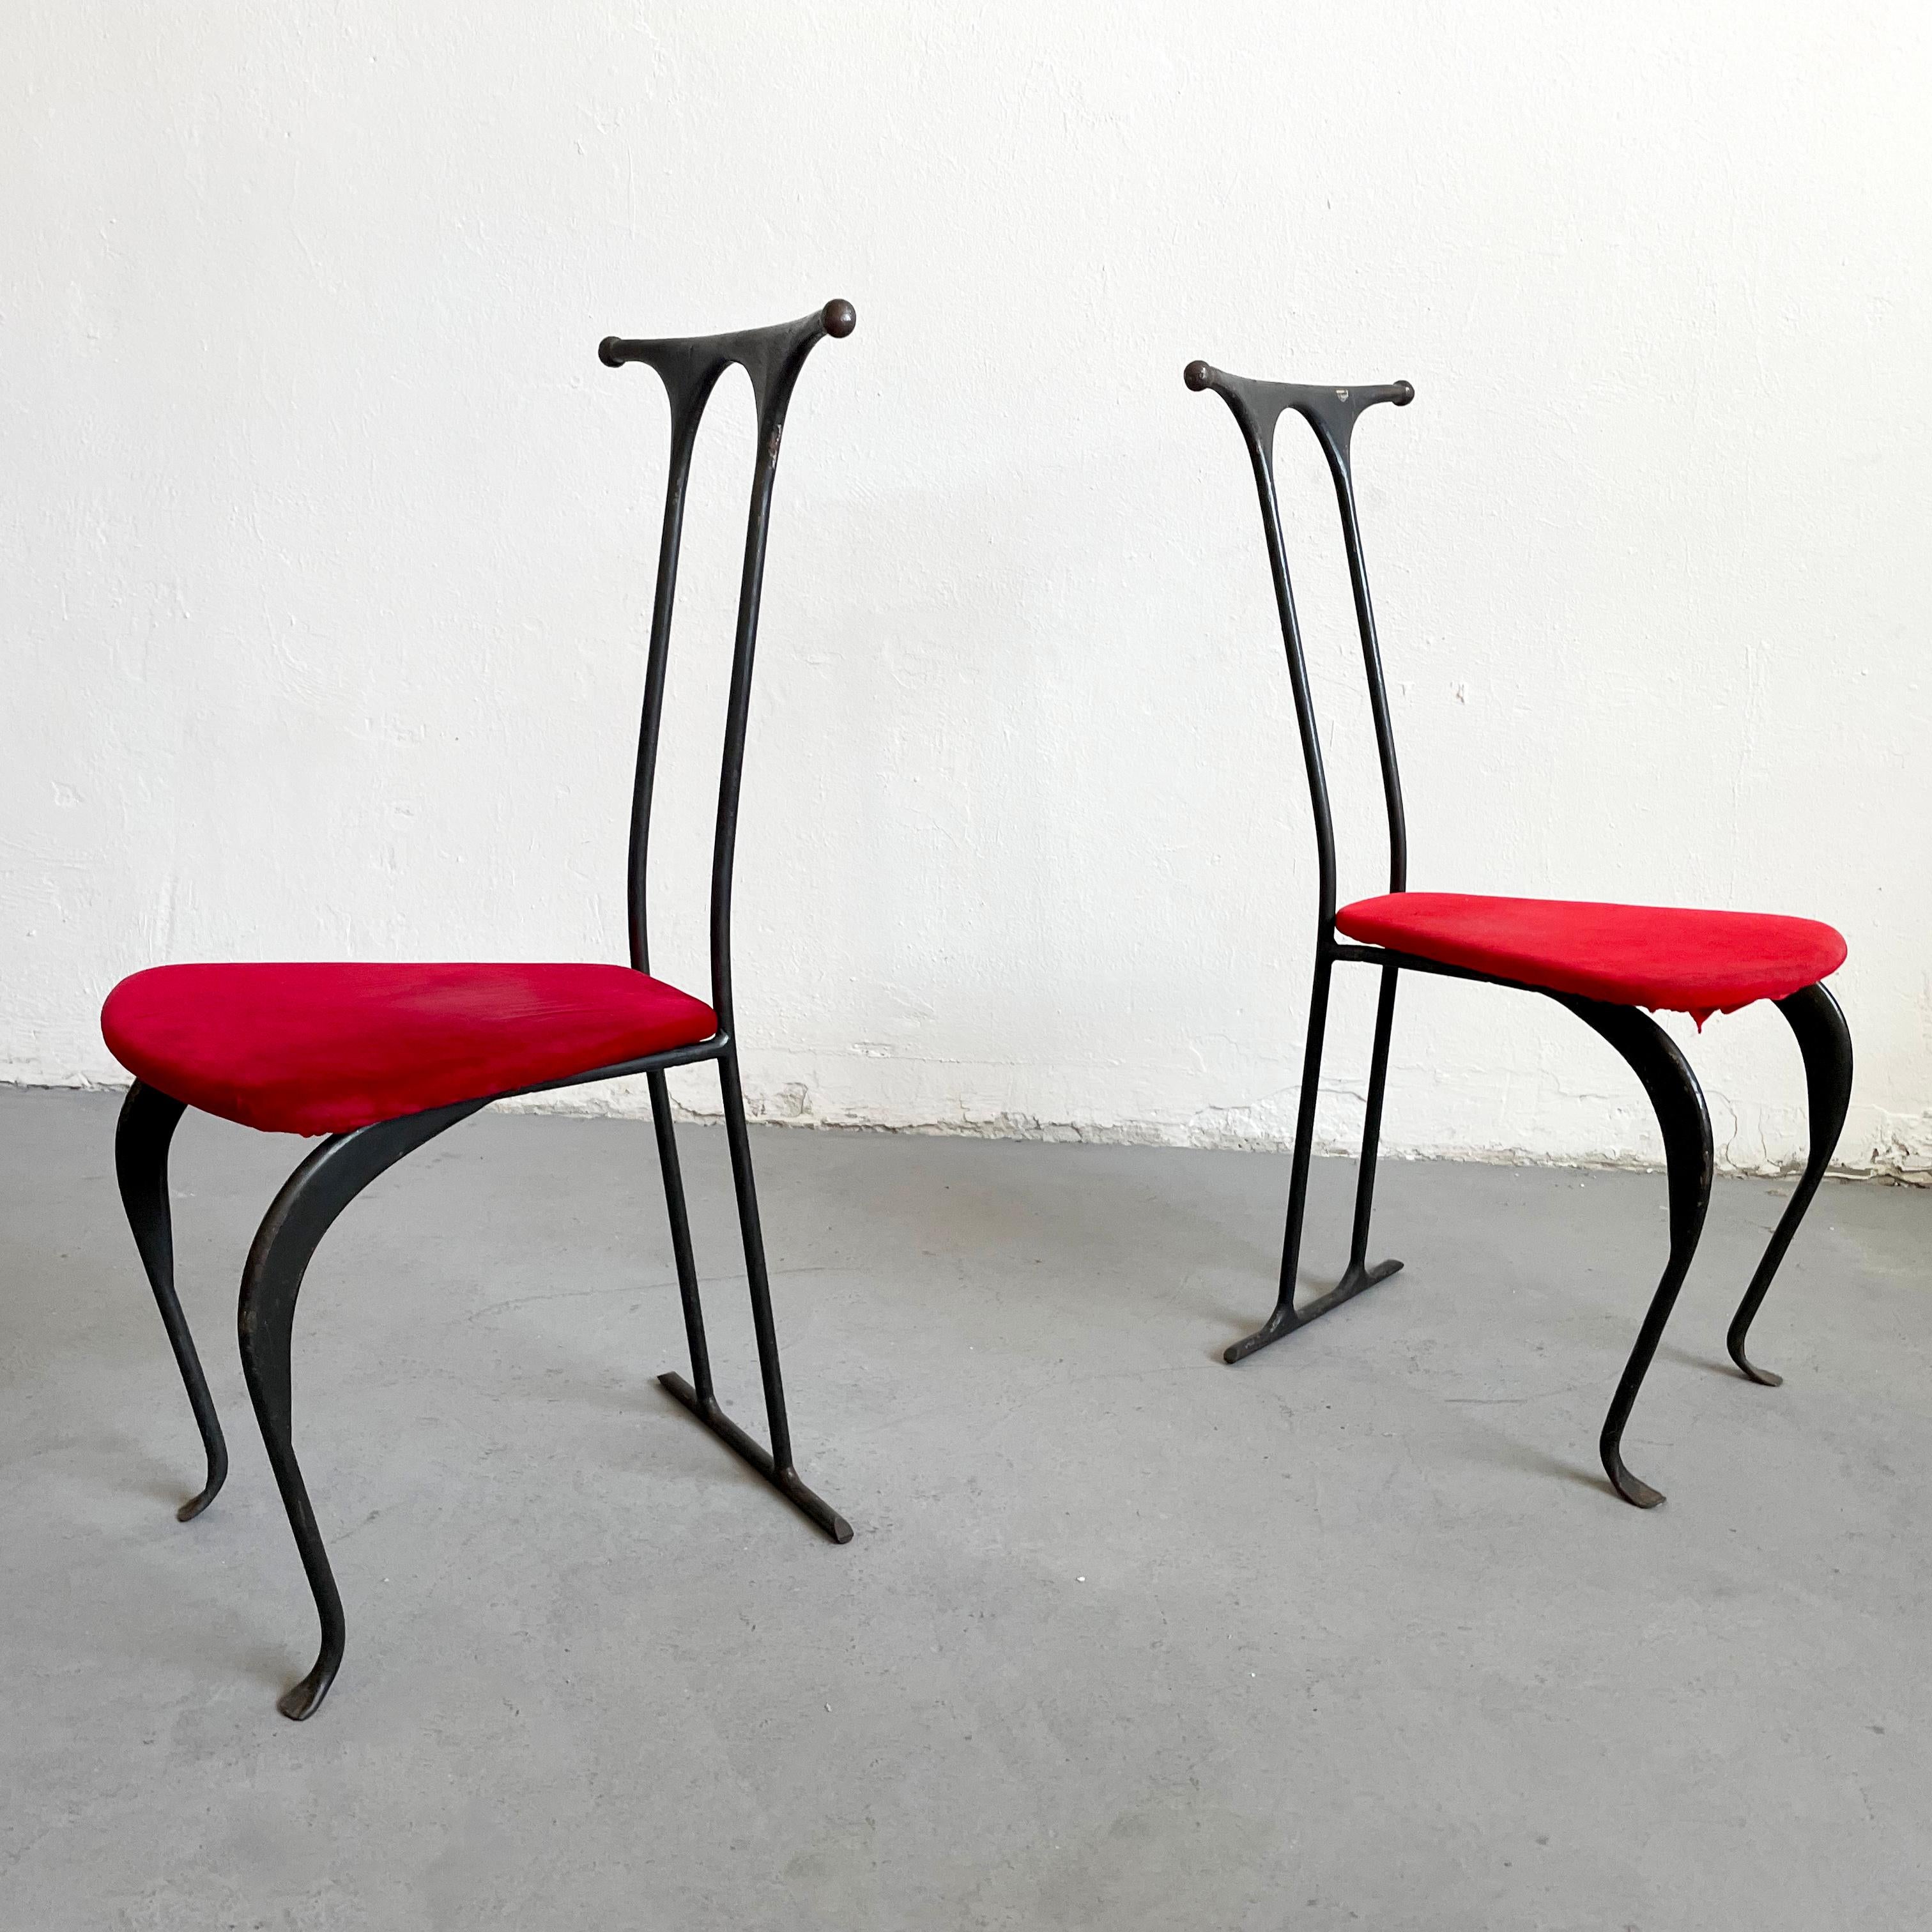 Pair of Postmodern Brutalist Artisanal Wrought Iron Chairs, Poland, 1980s 3